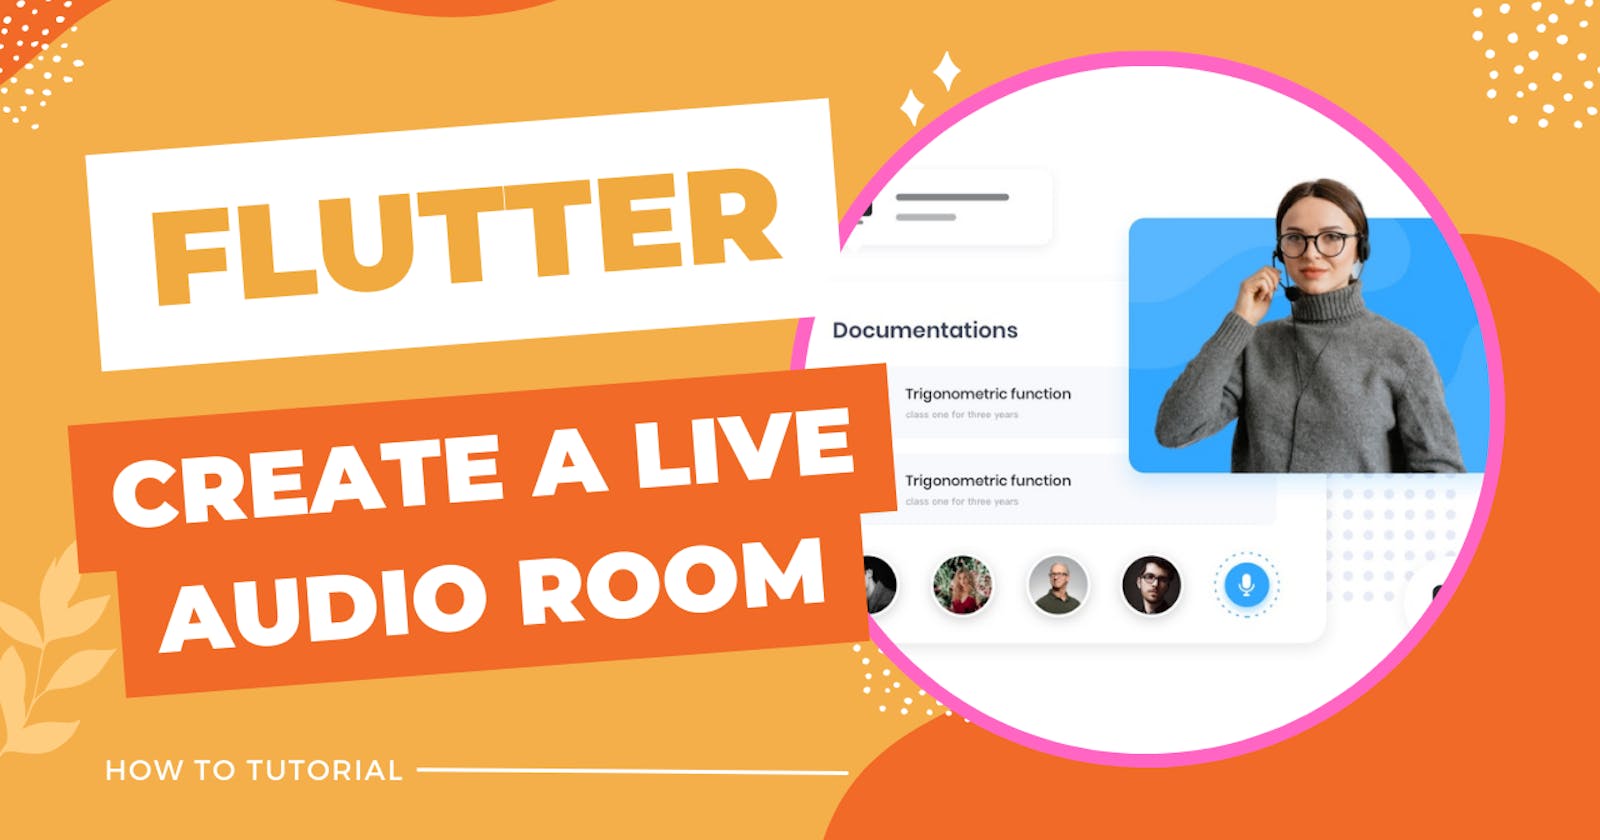 Step-by-Step Guide to Building a Live Audio Room with Flutter